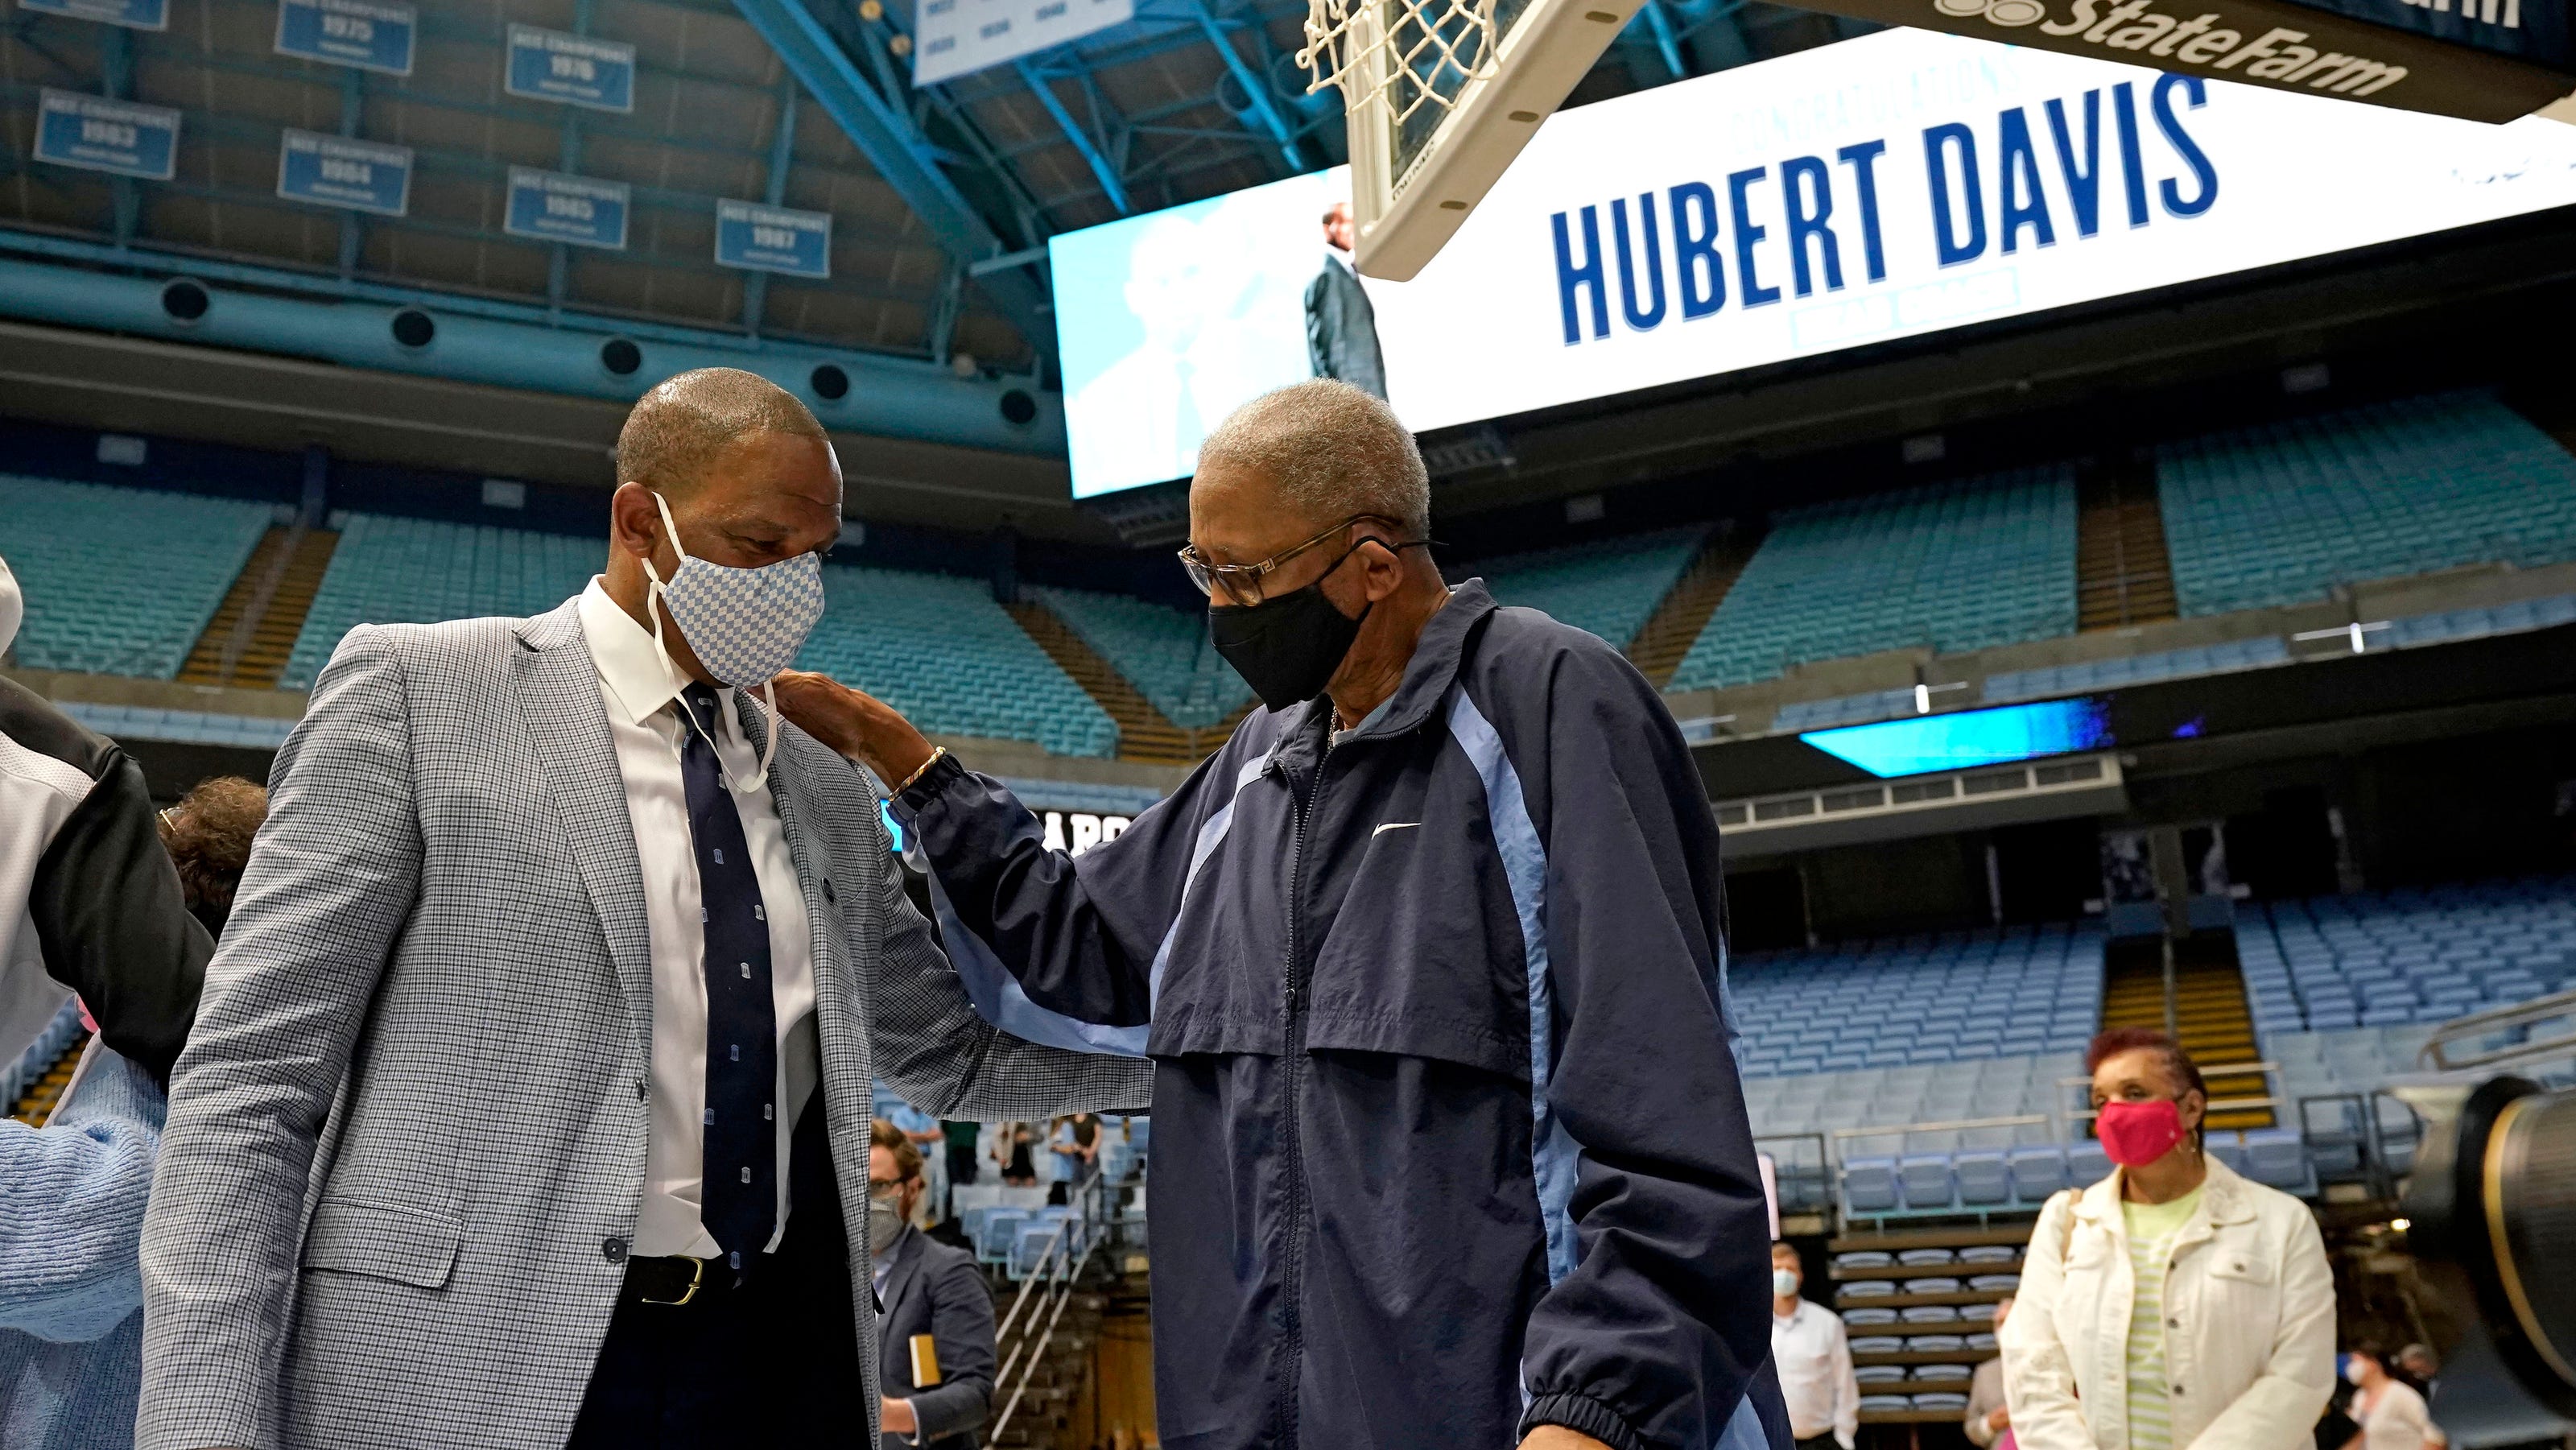 All in the family: Hubert Davis connects generations at UNC, from Dean Smith to Roy Williams